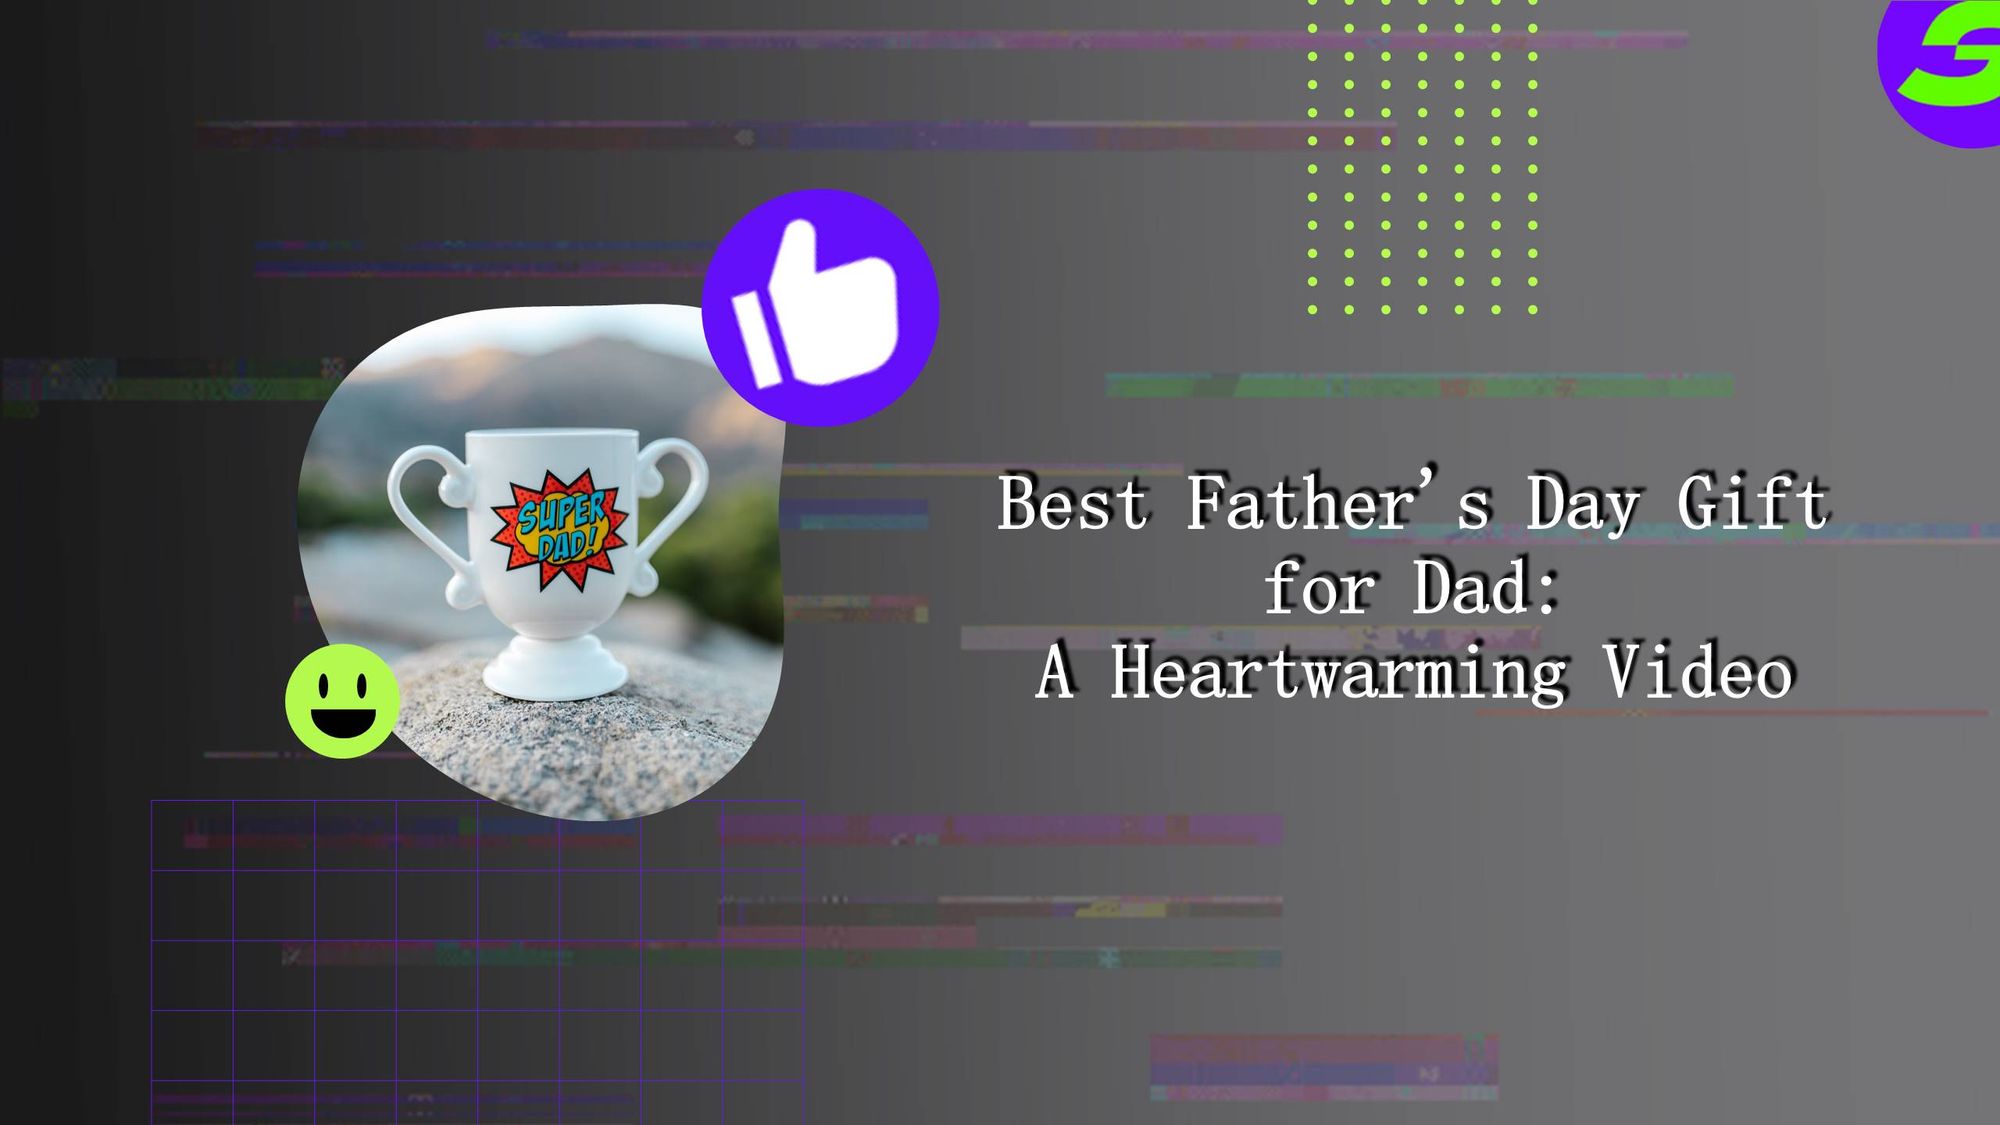 Using Free Video Editor to Create the best father's day gift a Heartwarming Father's Day Video